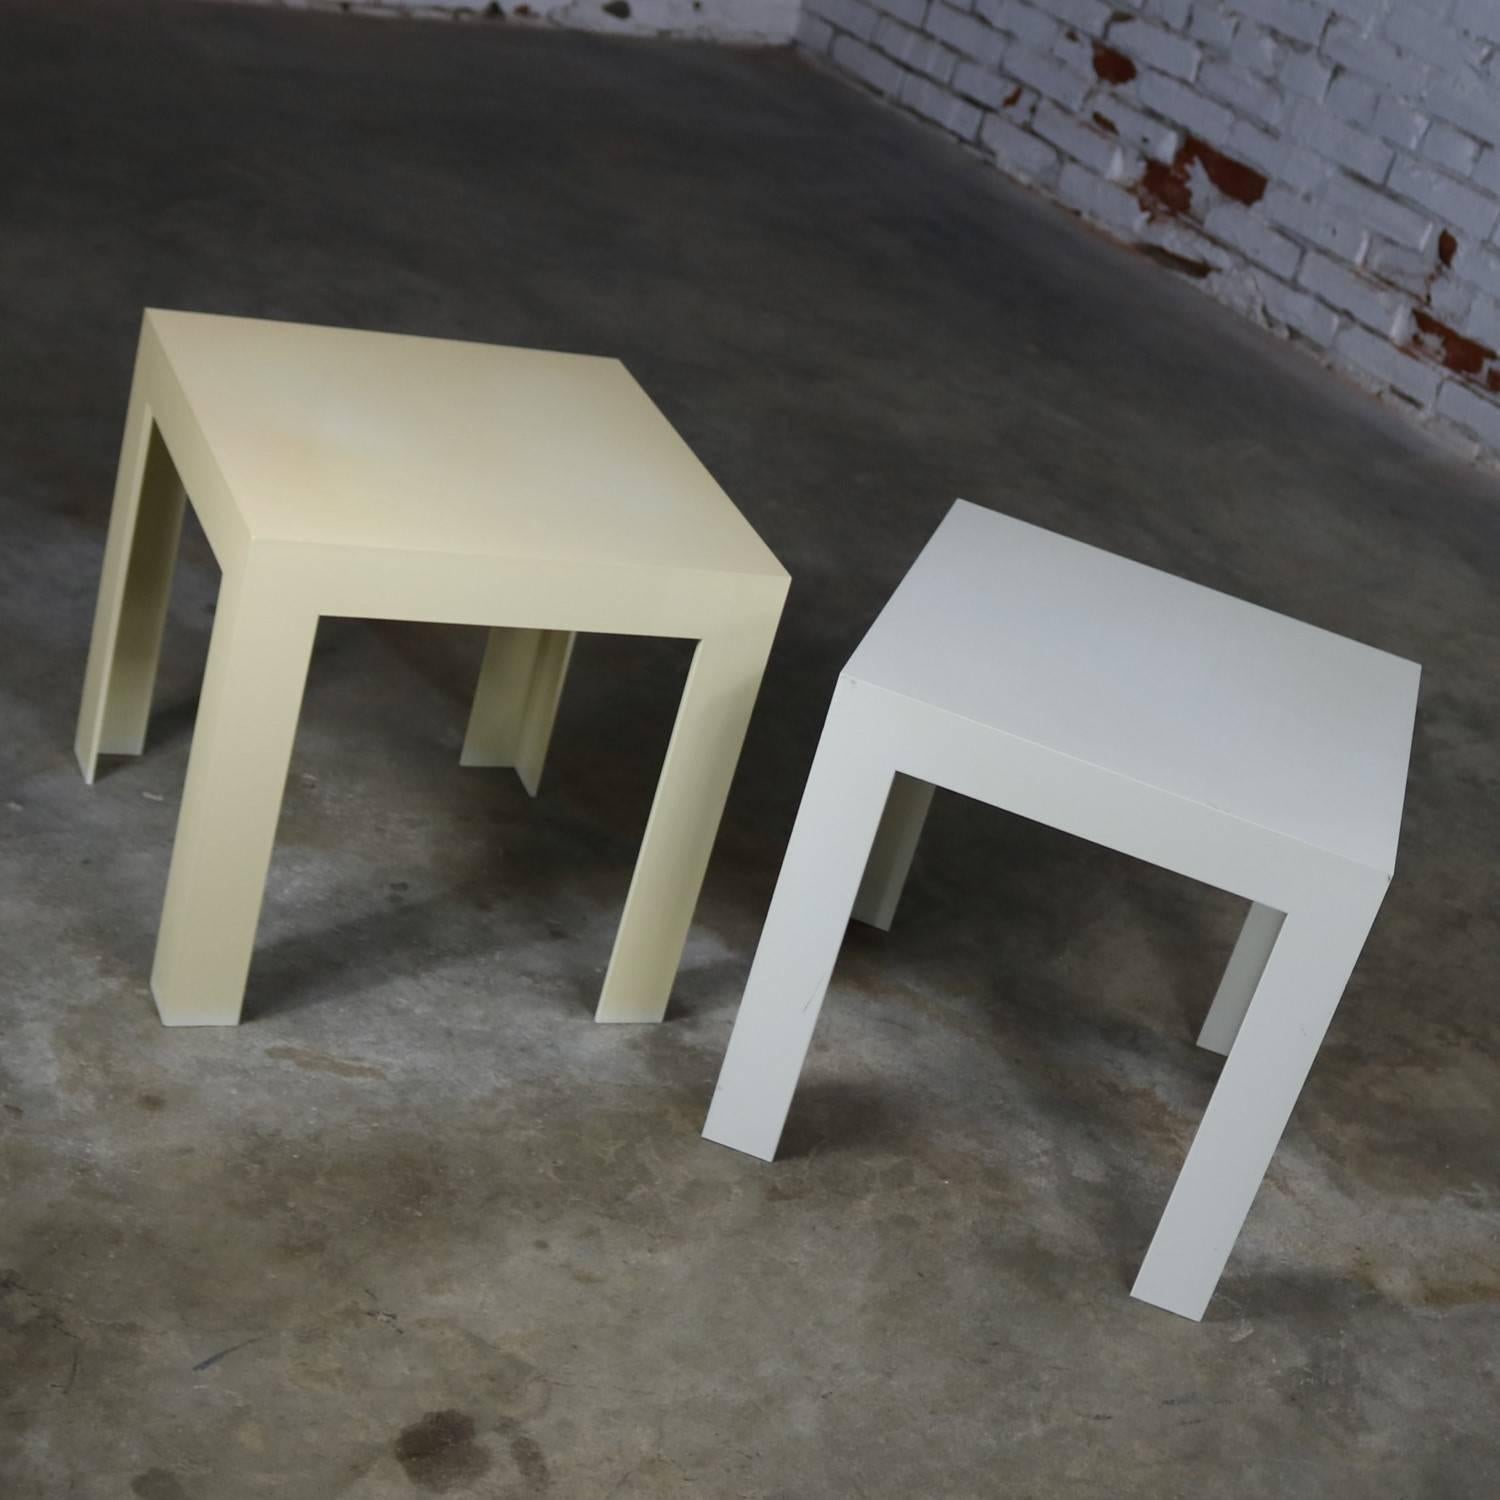 Classic Parsons side tables by Syroco. One of these Mid-Century Modern plastic tables is white and the other is ivory, circa 1960s and they are in wonderful vintage condition. We have priced them as a set but will sell individually. Message us for